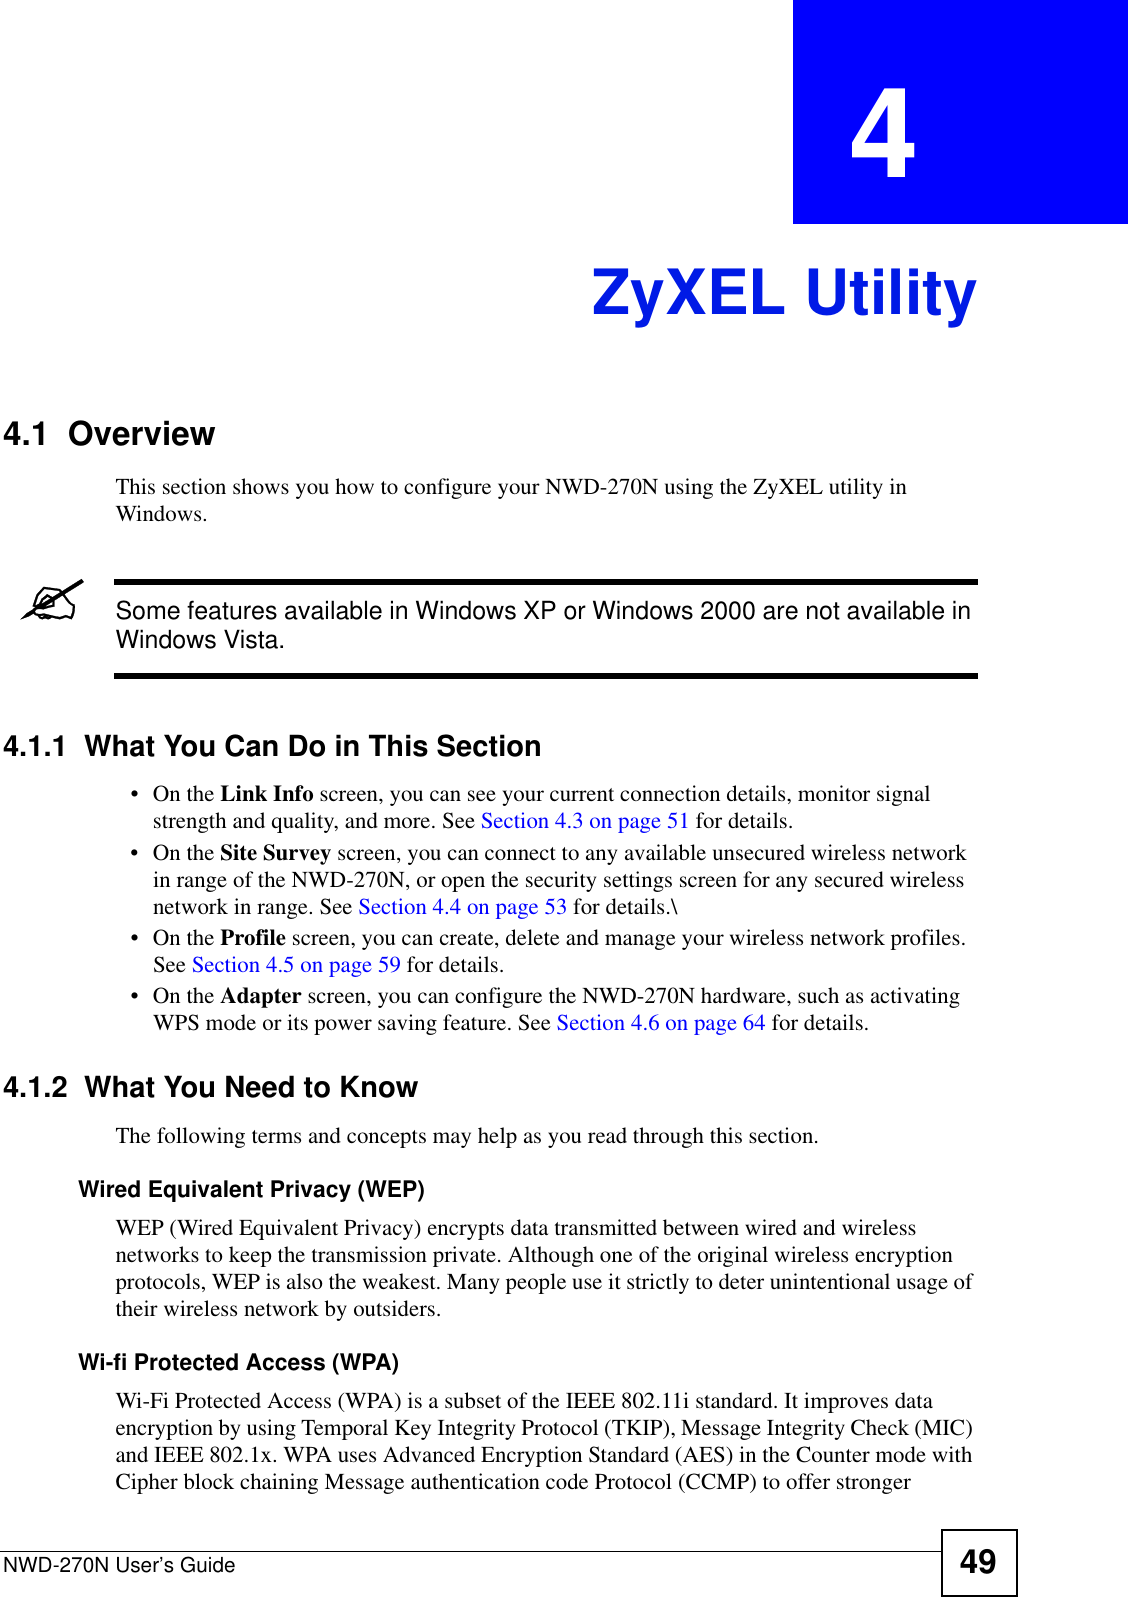 NWD-270N User’s Guide 49CHAPTER  4 ZyXEL Utility4.1  OverviewThis section shows you how to configure your NWD-270N using the ZyXEL utility in Windows.&quot;Some features available in Windows XP or Windows 2000 are not available in Windows Vista.4.1.1  What You Can Do in This Section•On the Link Info screen, you can see your current connection details, monitor signal strength and quality, and more. See Section 4.3 on page 51 for details.•On the Site Survey screen, you can connect to any available unsecured wireless network in range of the NWD-270N, or open the security settings screen for any secured wireless network in range. See Section 4.4 on page 53 for details.\•On the Profile screen, you can create, delete and manage your wireless network profiles. See Section 4.5 on page 59 for details.•On the Adapter screen, you can configure the NWD-270N hardware, such as activating WPS mode or its power saving feature. See Section 4.6 on page 64 for details.4.1.2  What You Need to KnowThe following terms and concepts may help as you read through this section.Wired Equivalent Privacy (WEP)WEP (Wired Equivalent Privacy) encrypts data transmitted between wired and wireless networks to keep the transmission private. Although one of the original wireless encryption protocols, WEP is also the weakest. Many people use it strictly to deter unintentional usage of their wireless network by outsiders.Wi-fi Protected Access (WPA)Wi-Fi Protected Access (WPA) is a subset of the IEEE 802.11i standard. It improves data encryption by using Temporal Key Integrity Protocol (TKIP), Message Integrity Check (MIC) and IEEE 802.1x. WPA uses Advanced Encryption Standard (AES) in the Counter mode with Cipher block chaining Message authentication code Protocol (CCMP) to offer stronger 